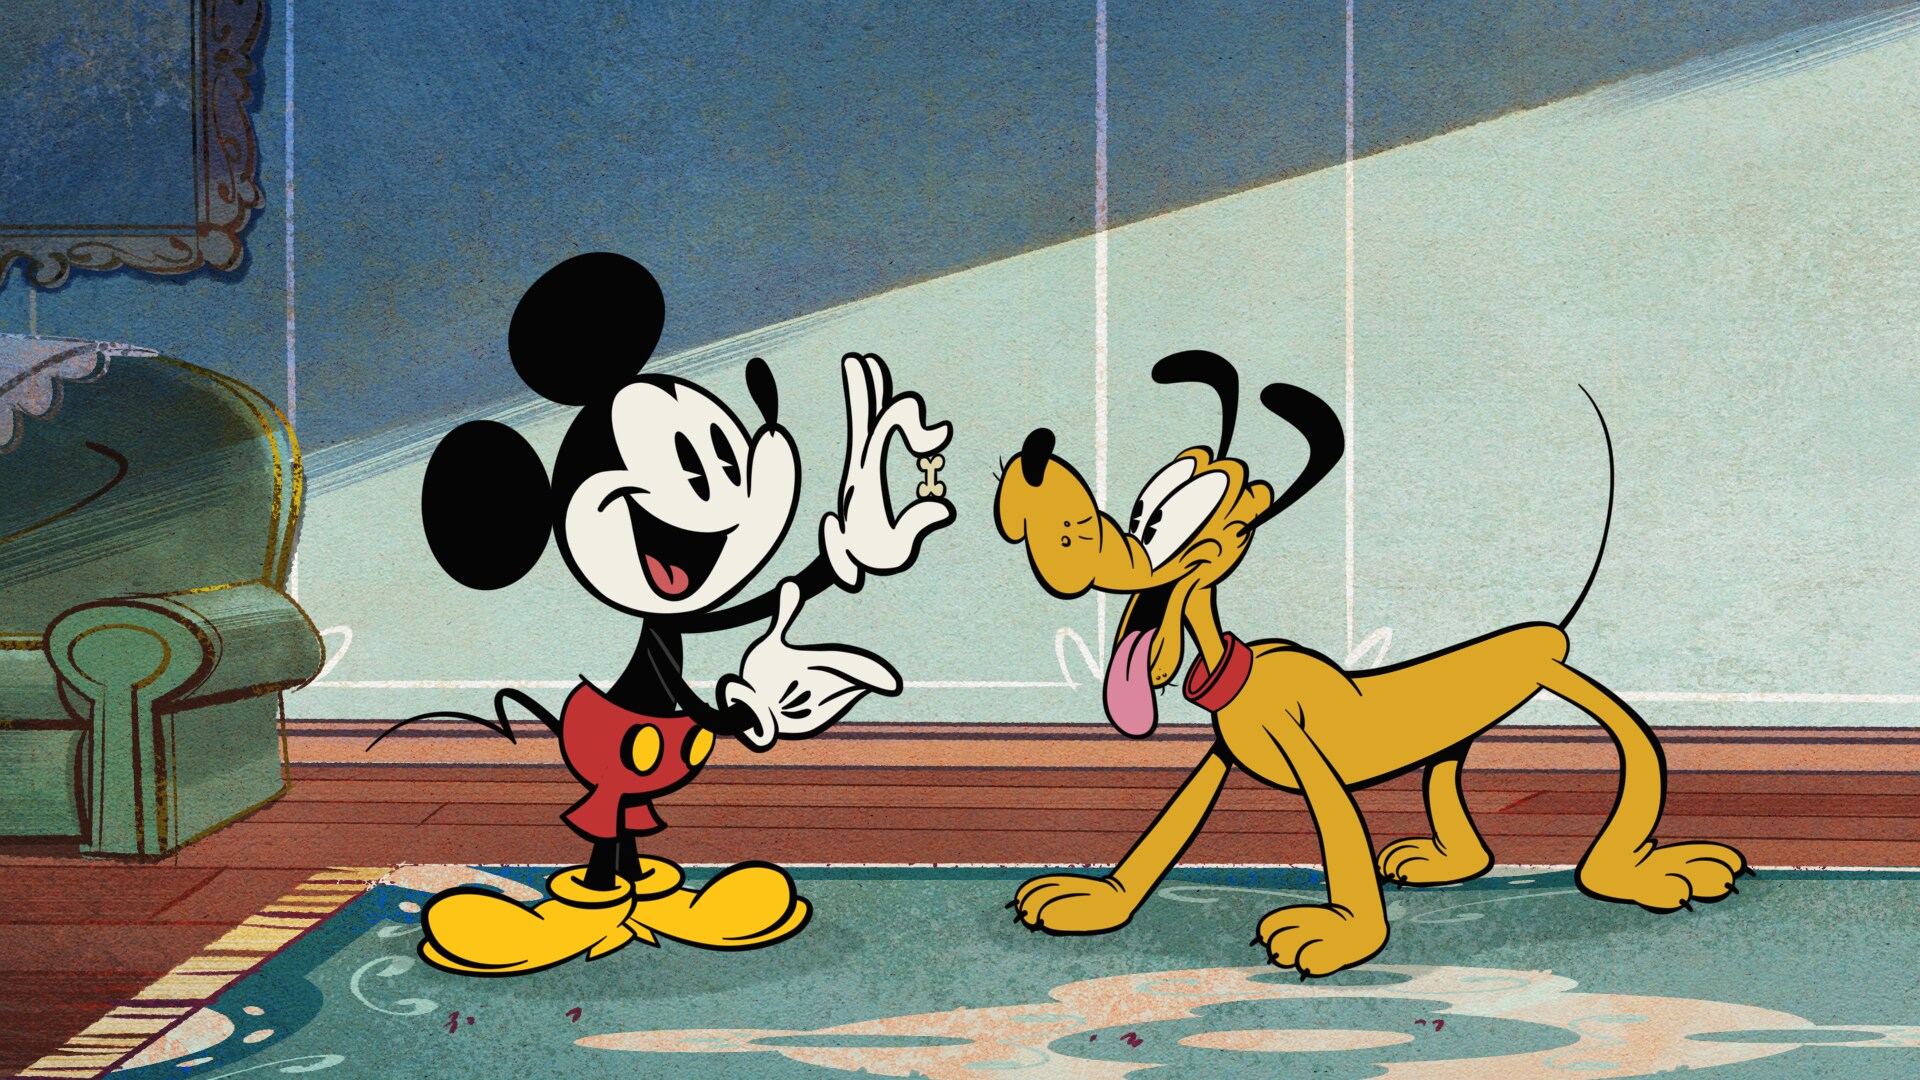 THE WONDERFUL WORLD OF MICKEY MOUSE - "Hard To Swallow" - Mickey runs into trouble when he tries to make Pluto swallow a simple little pill. (Disney+) MICKEY MOUSE, PLUTO